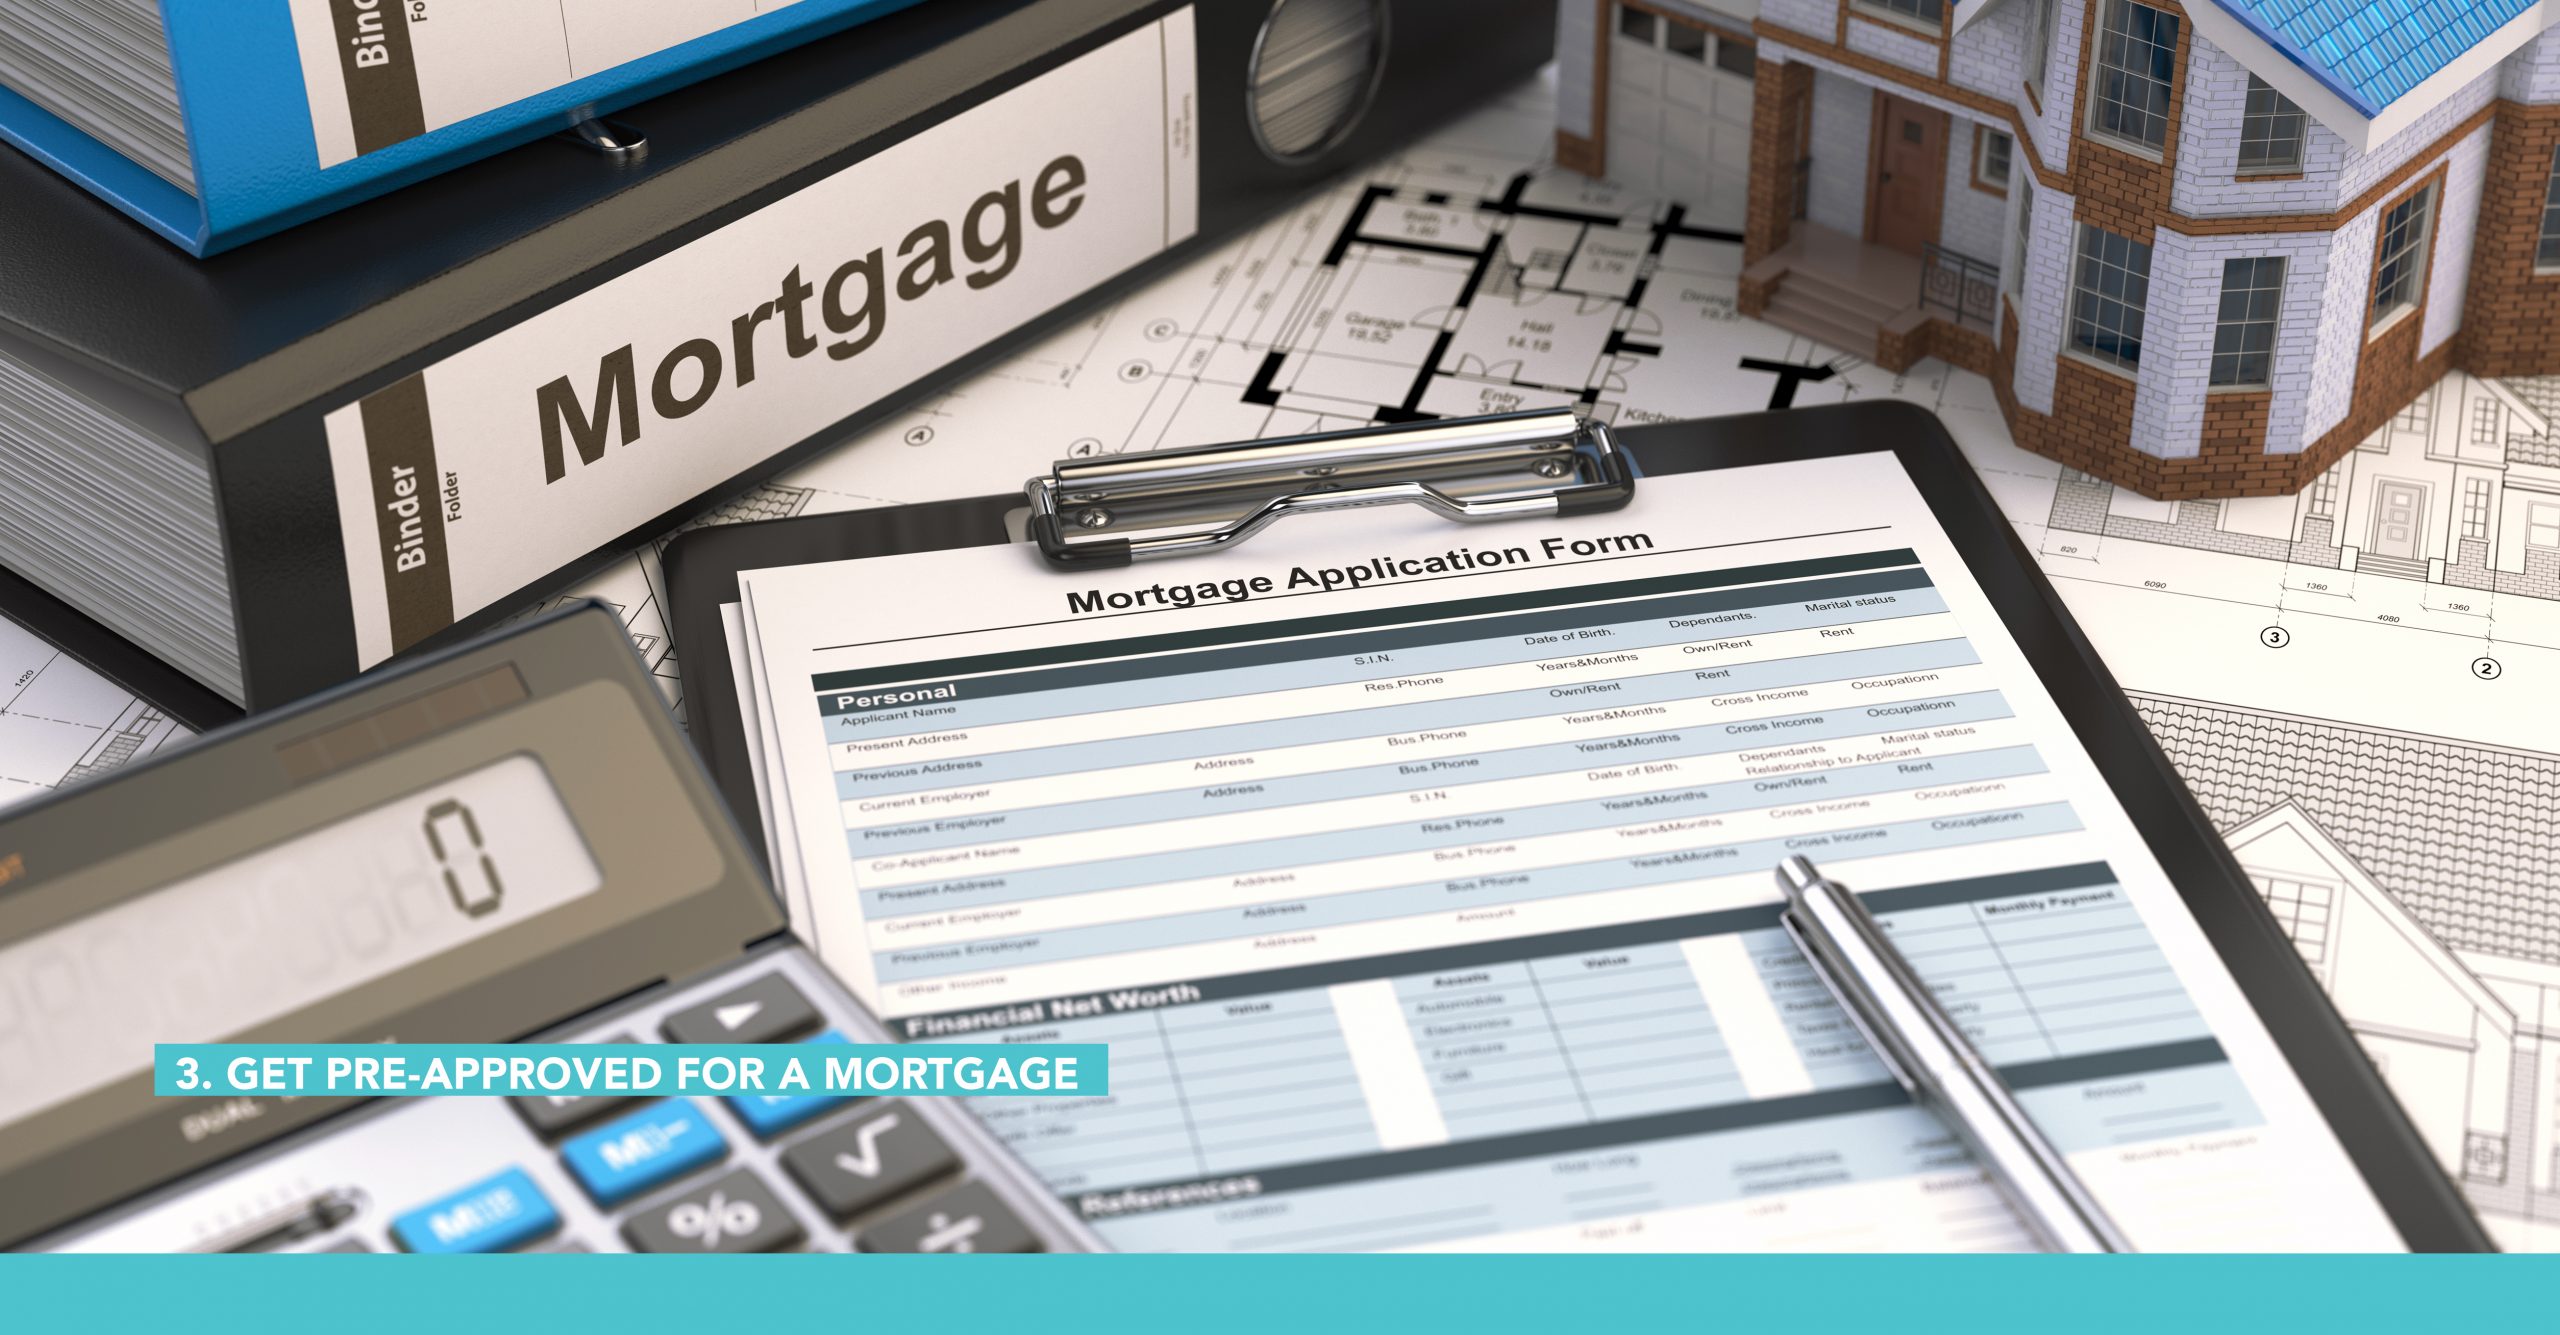 Get pre-approved for a mortgage